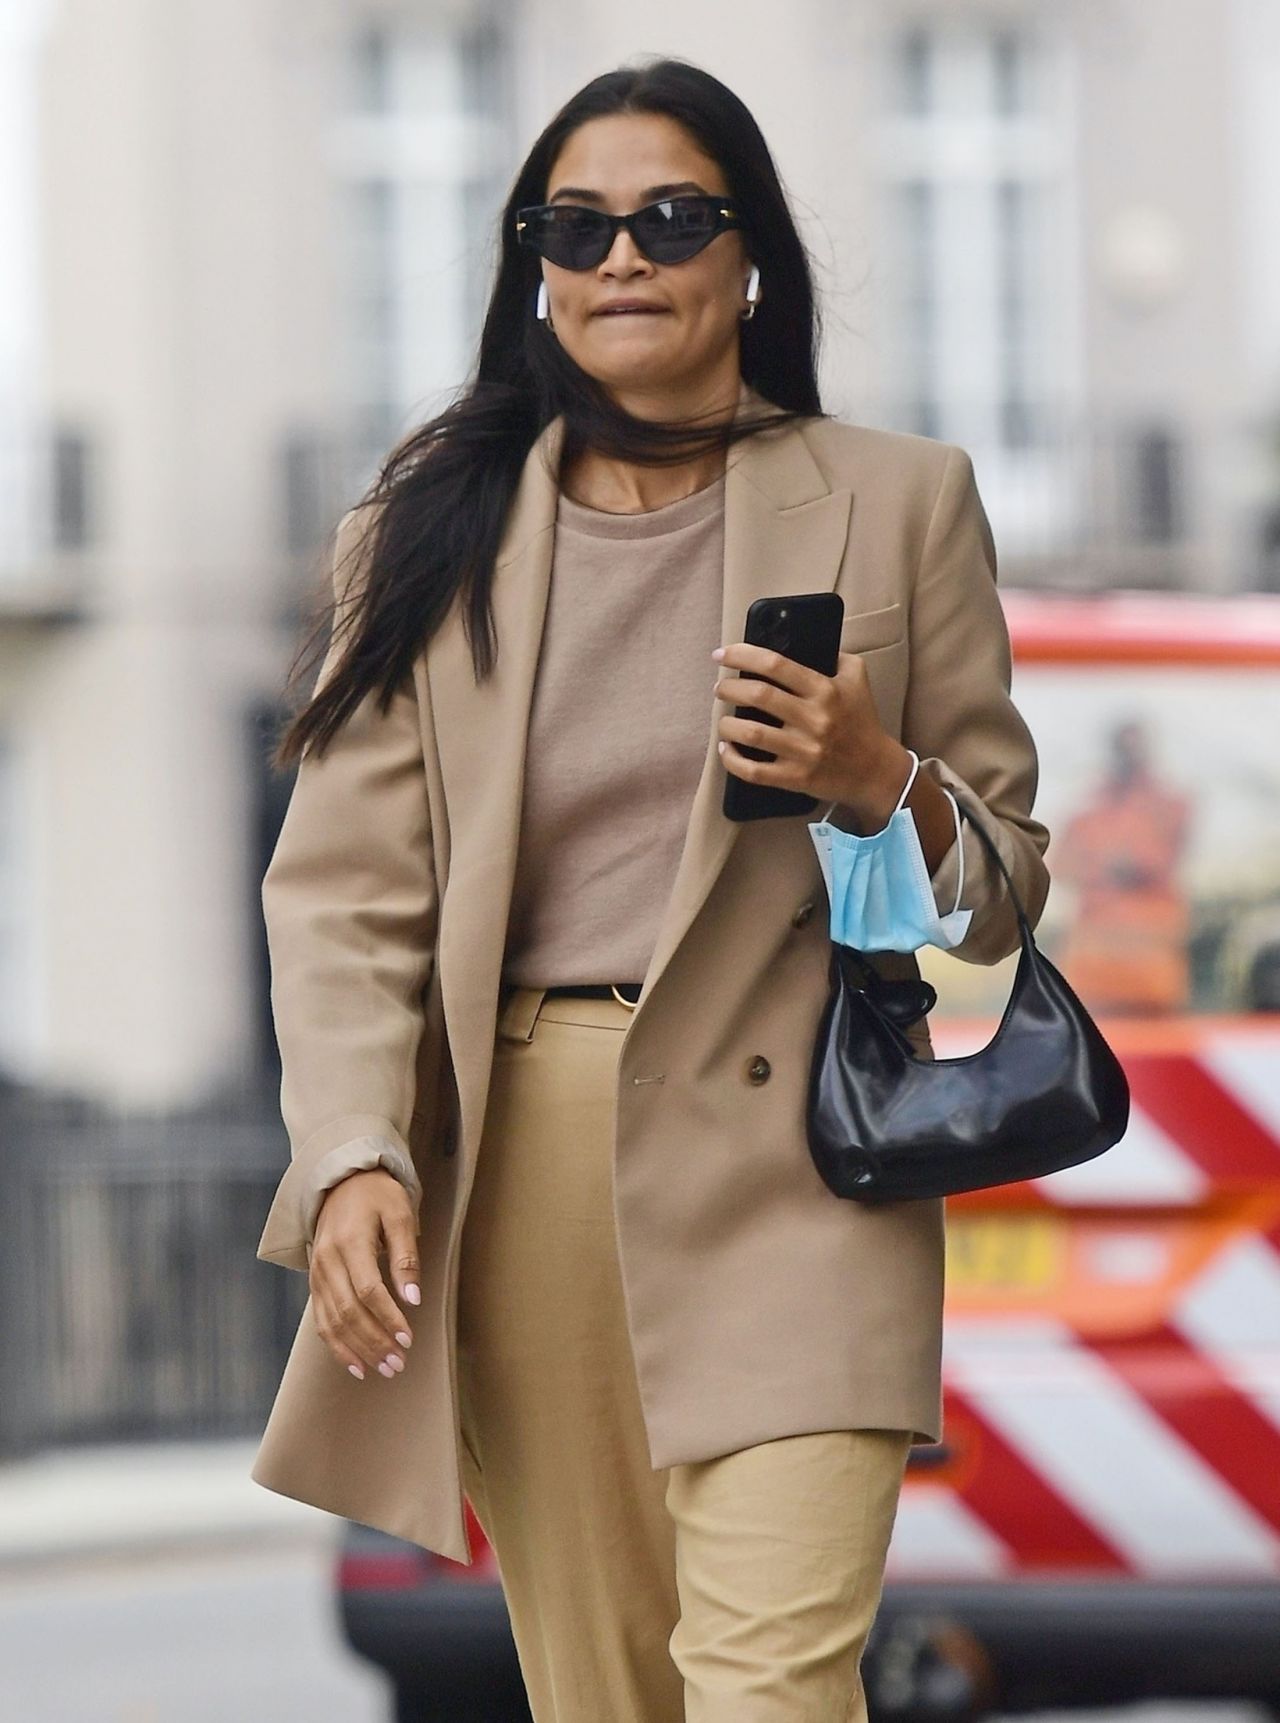 shanina-shaik-looking-stylish-in-a-beige-trousers-and-jacket-london-09-15-2020-3.jpg